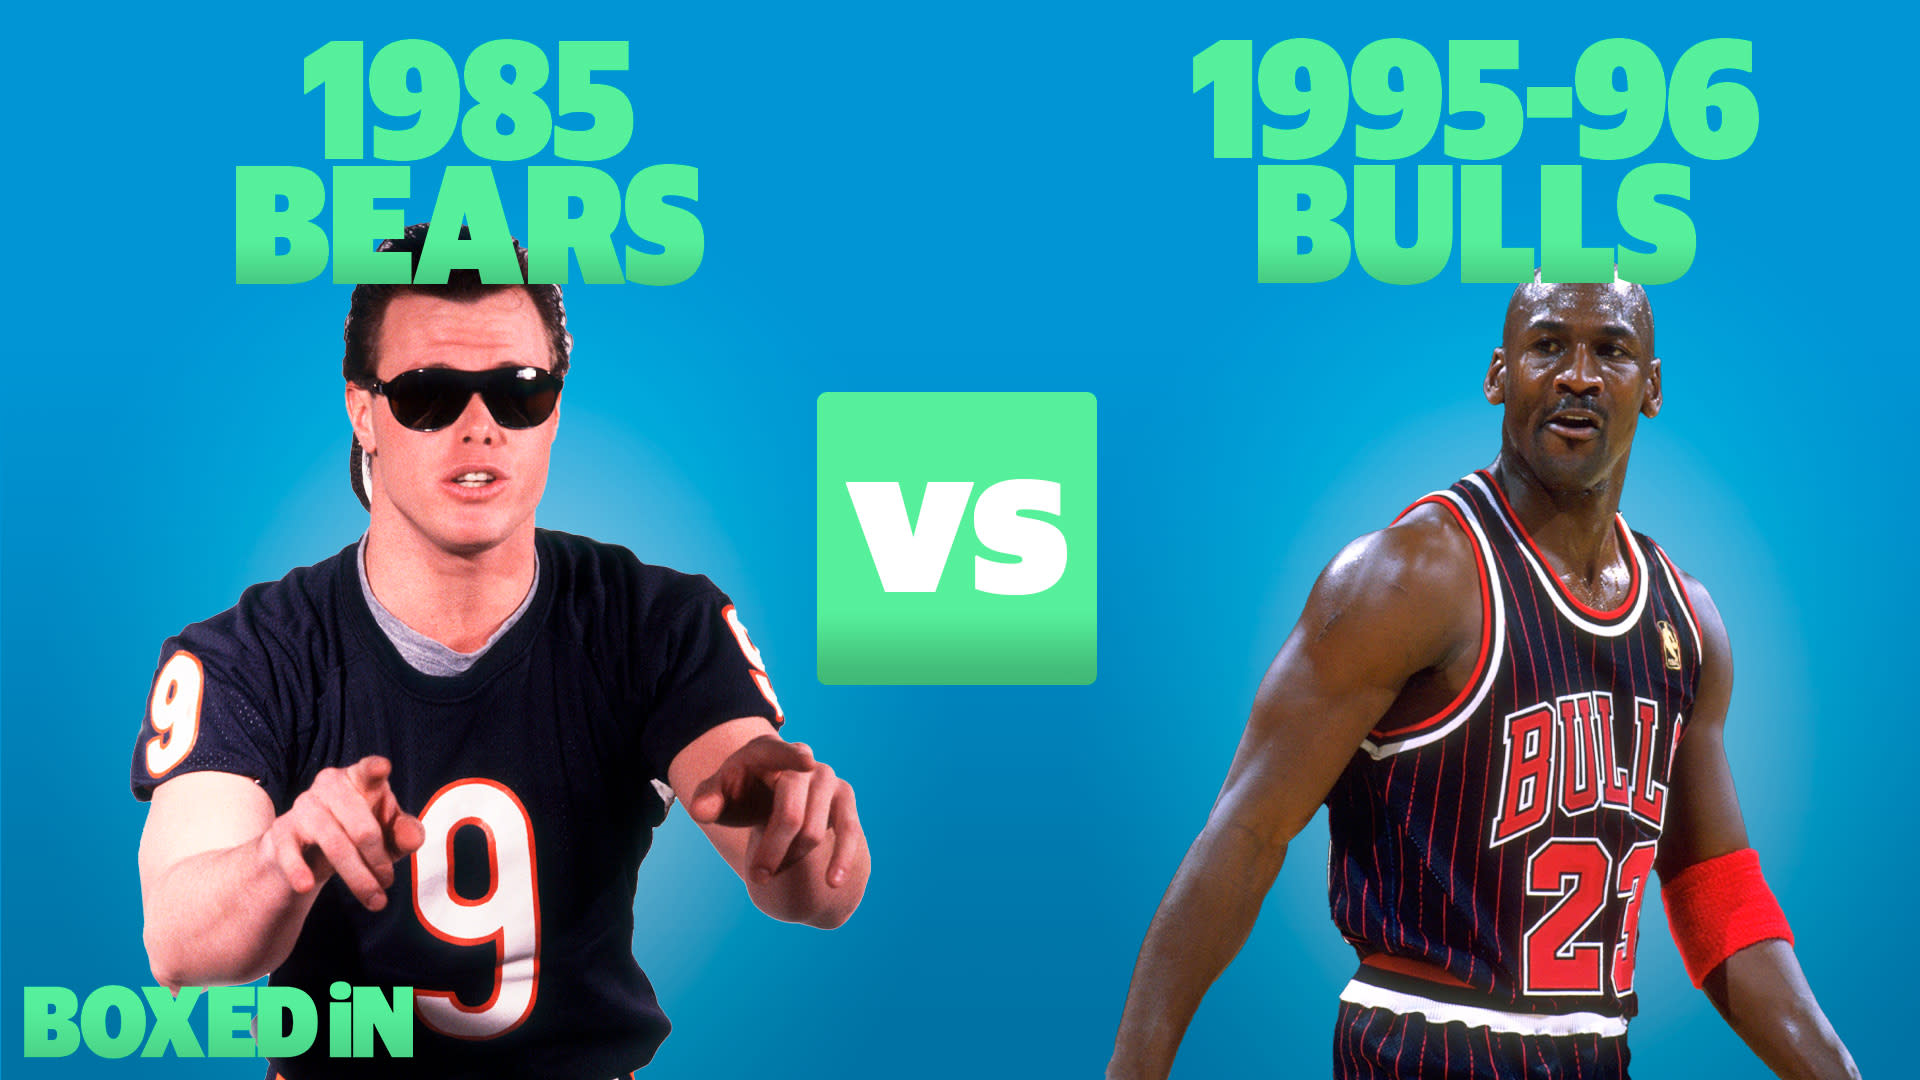 The 1985 Bears were crowned as the best NFL team ever. Why is their legacy  so strong?